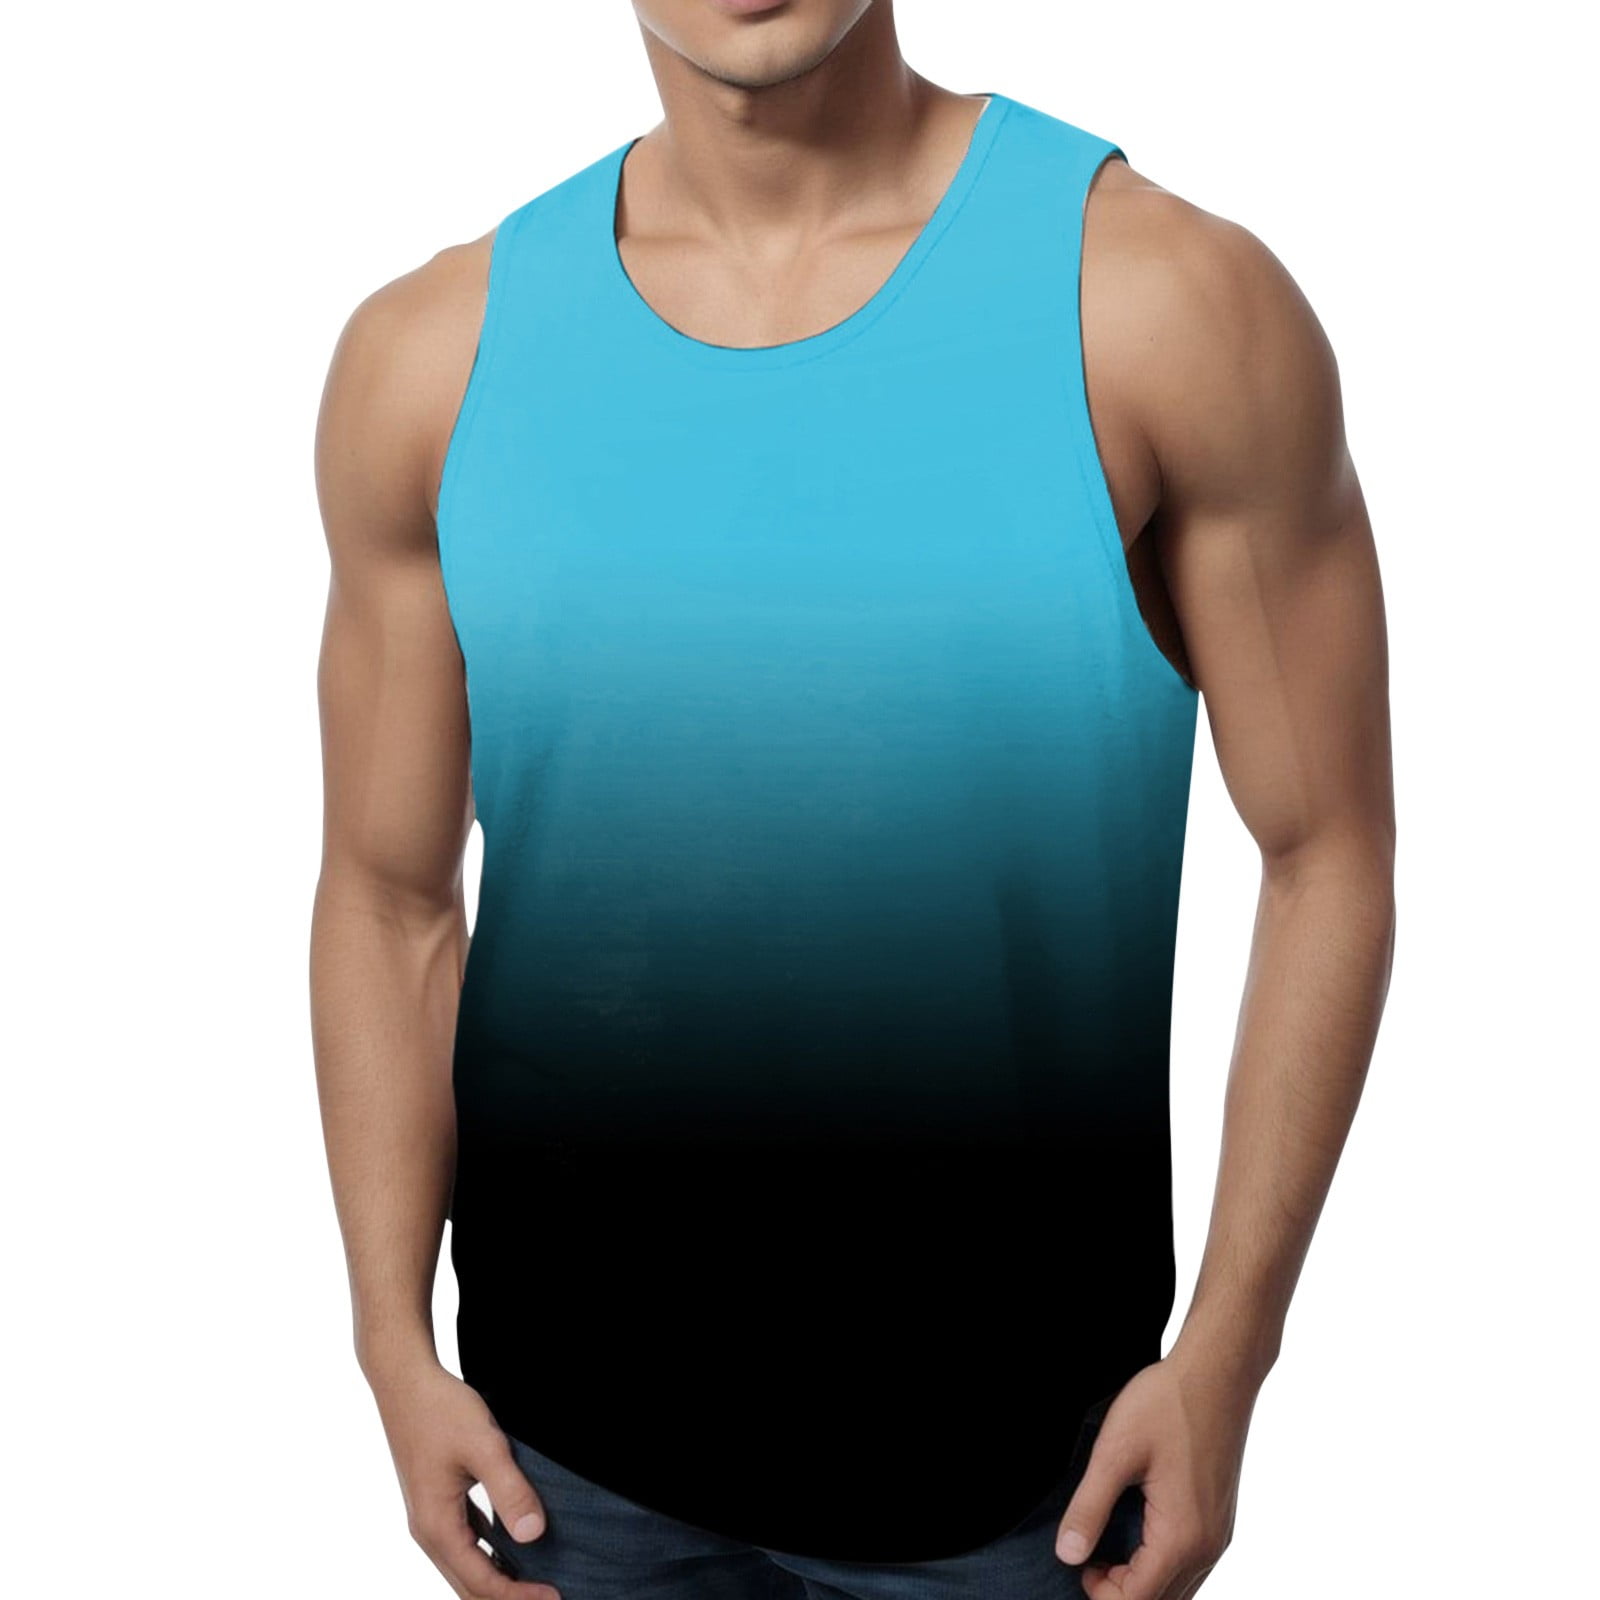 Caqnni Tank Tops for Men Big and Tall, Men's Sportstyle Left Chest Cut ...